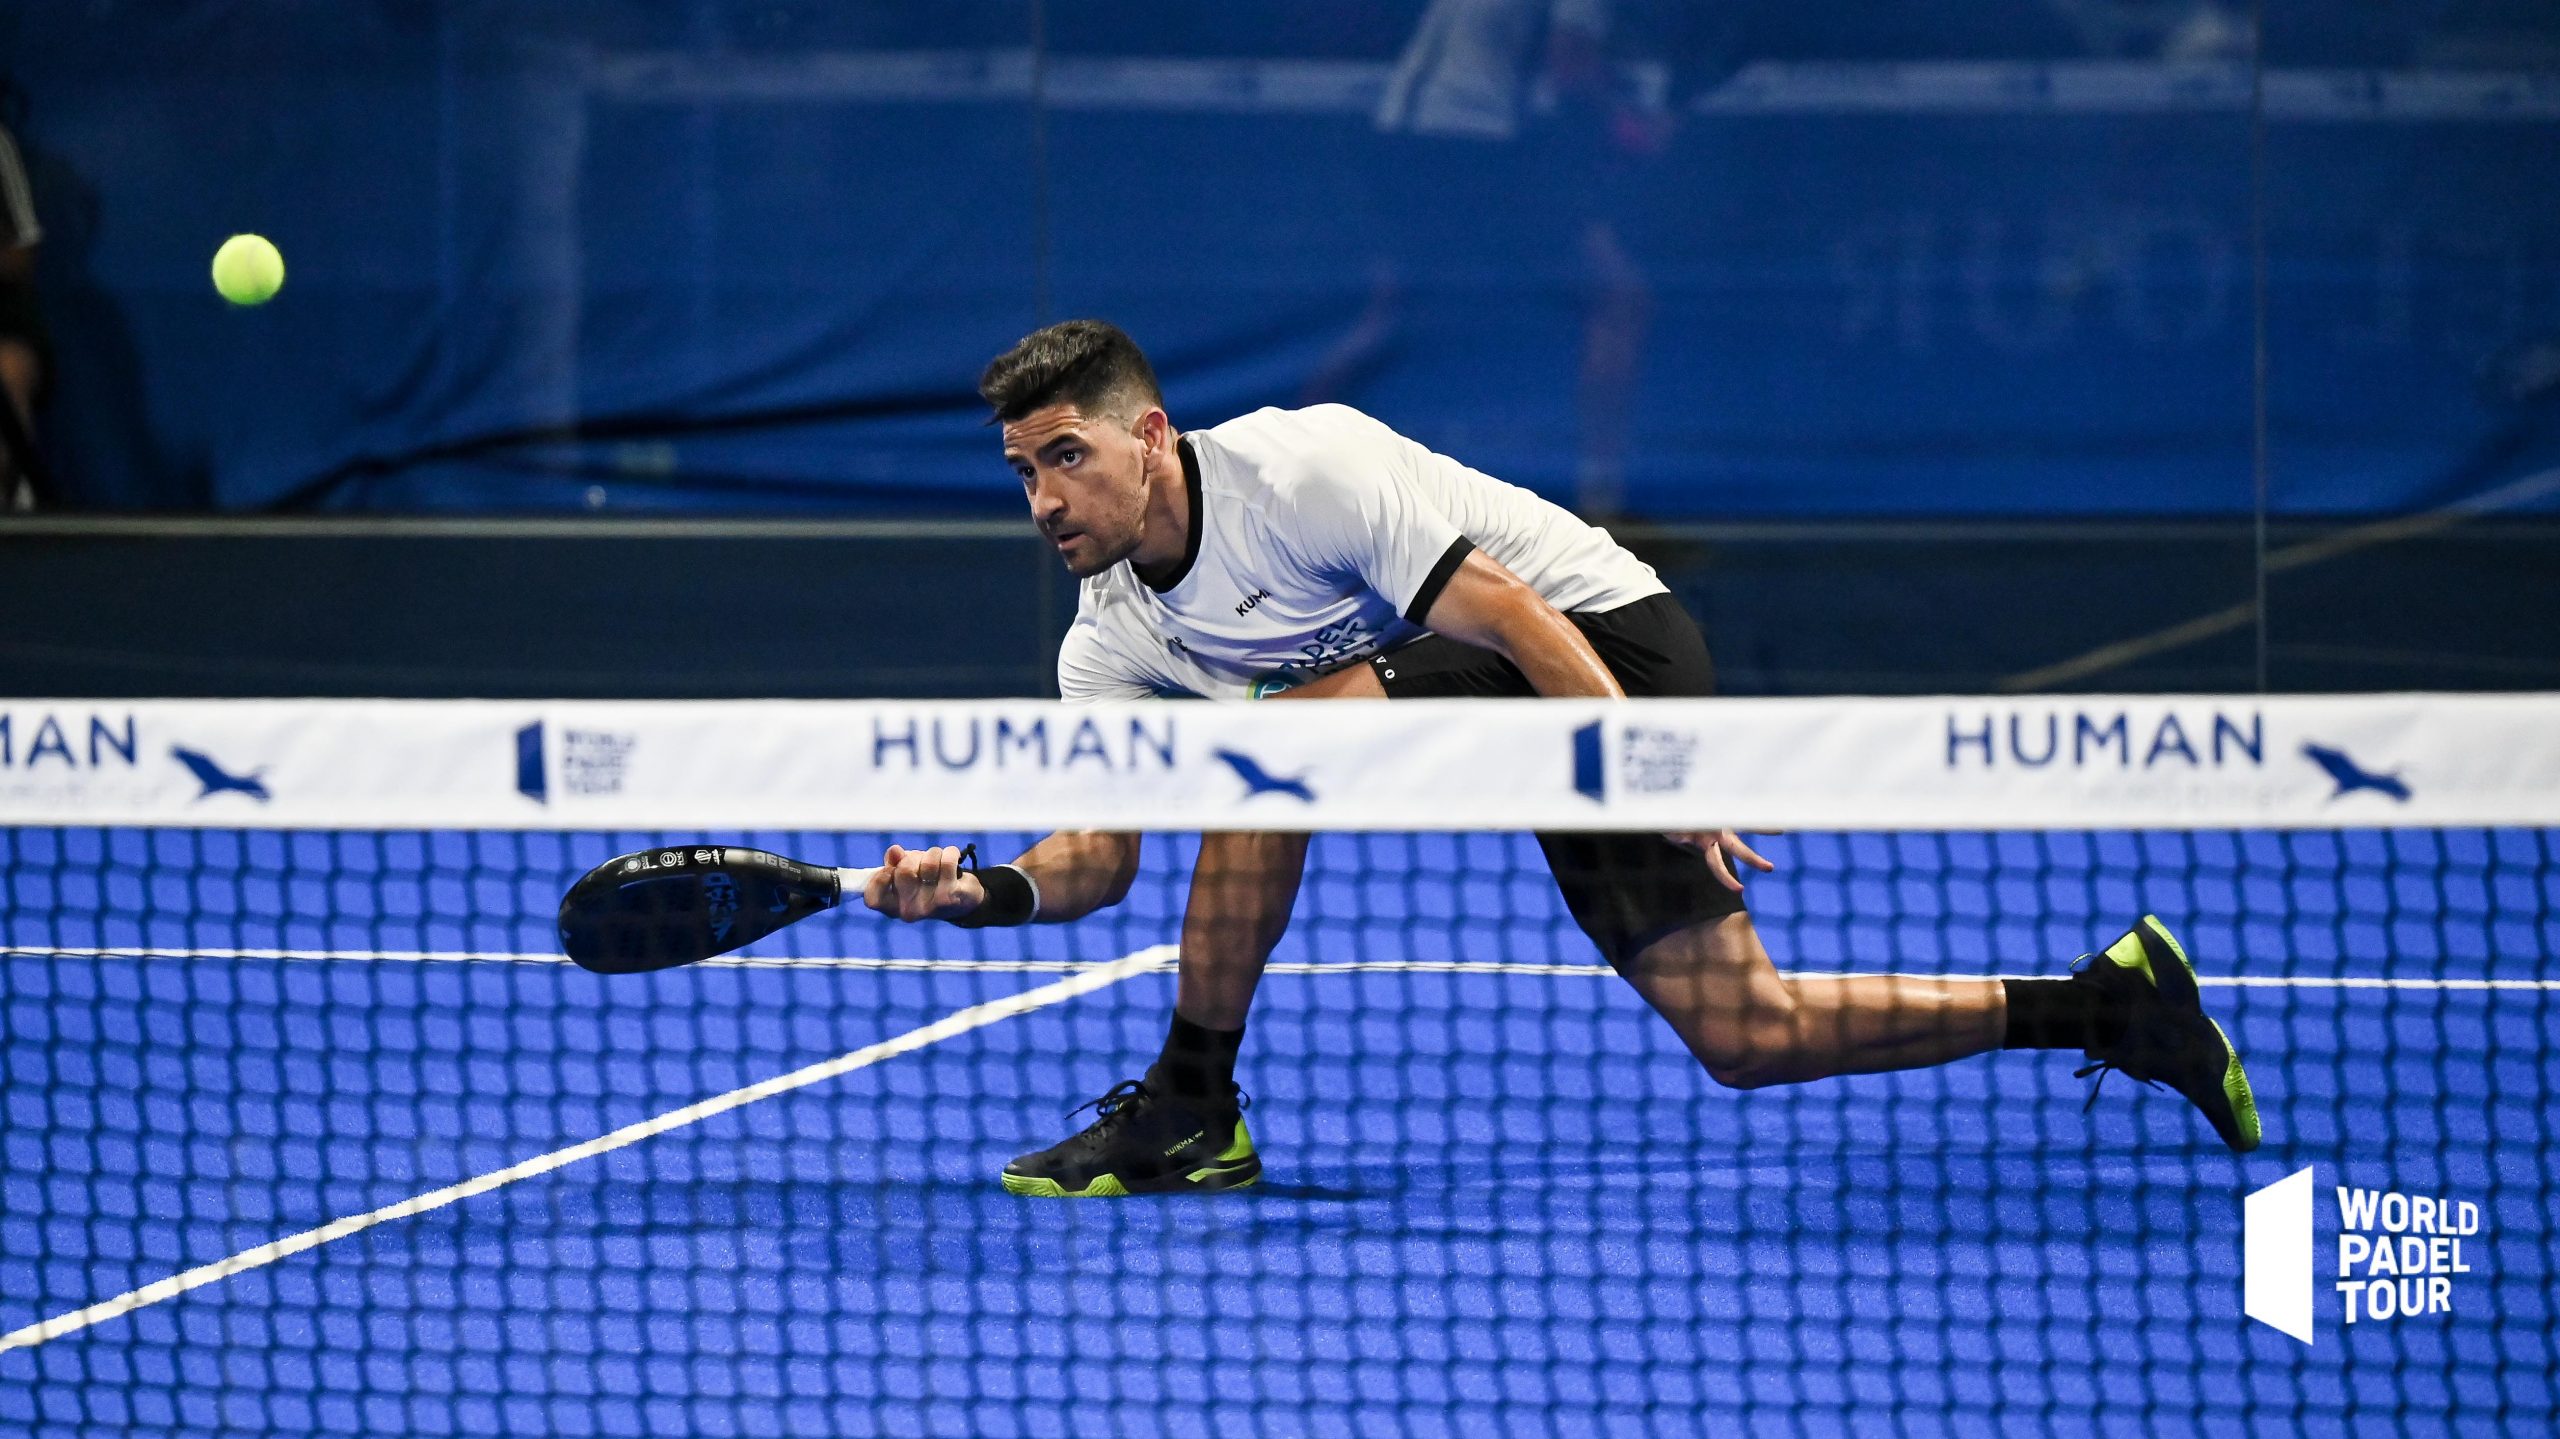 No joy for local heroes in Human French Padel Open 2022 round of 32